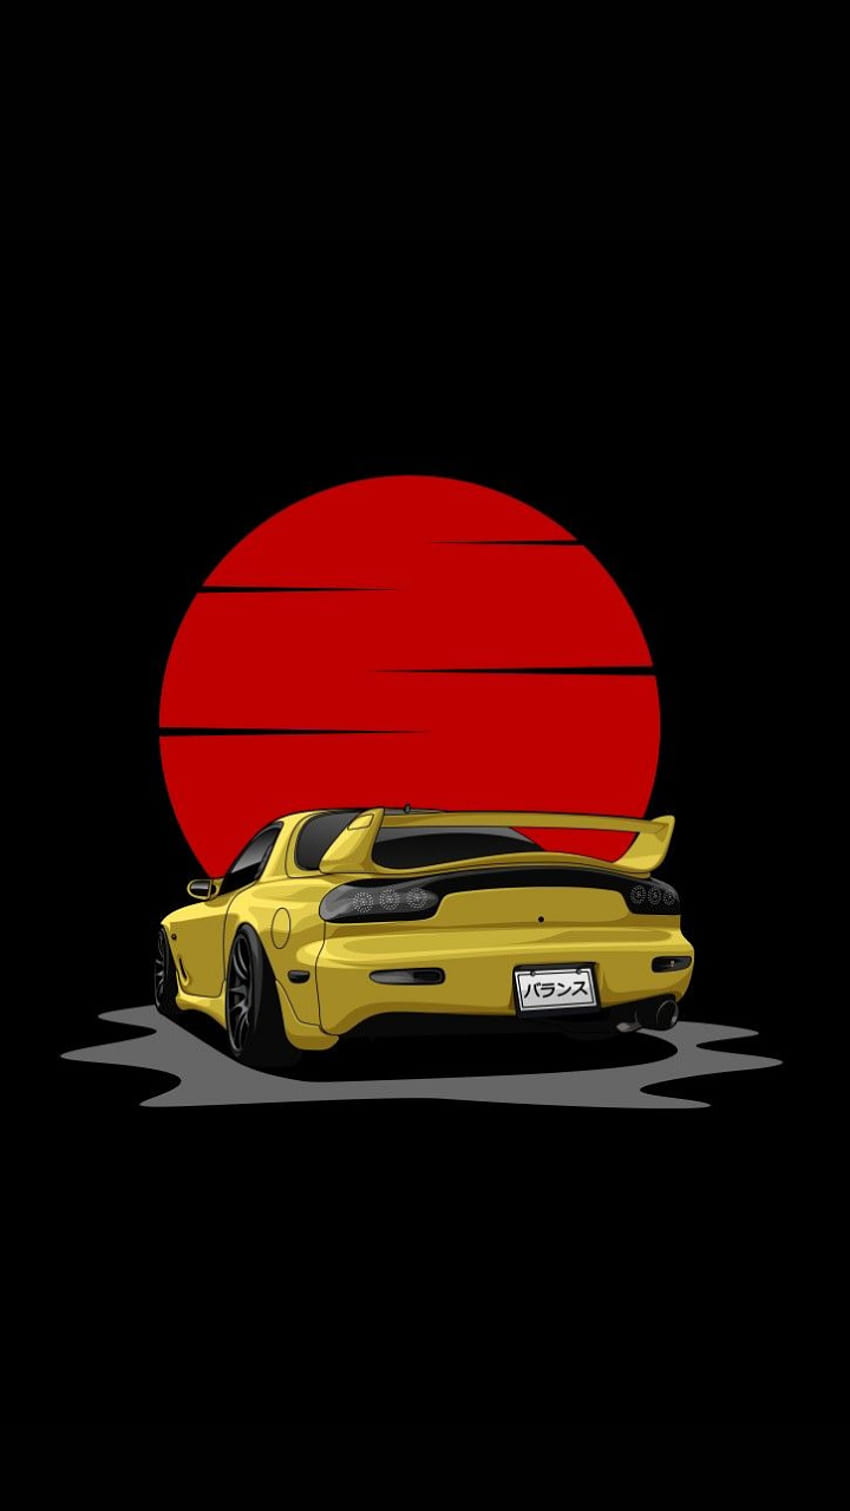 Mazda RX7 Night IPhone Wallpaper  IPhone Wallpapers  iPhone Wallpapers